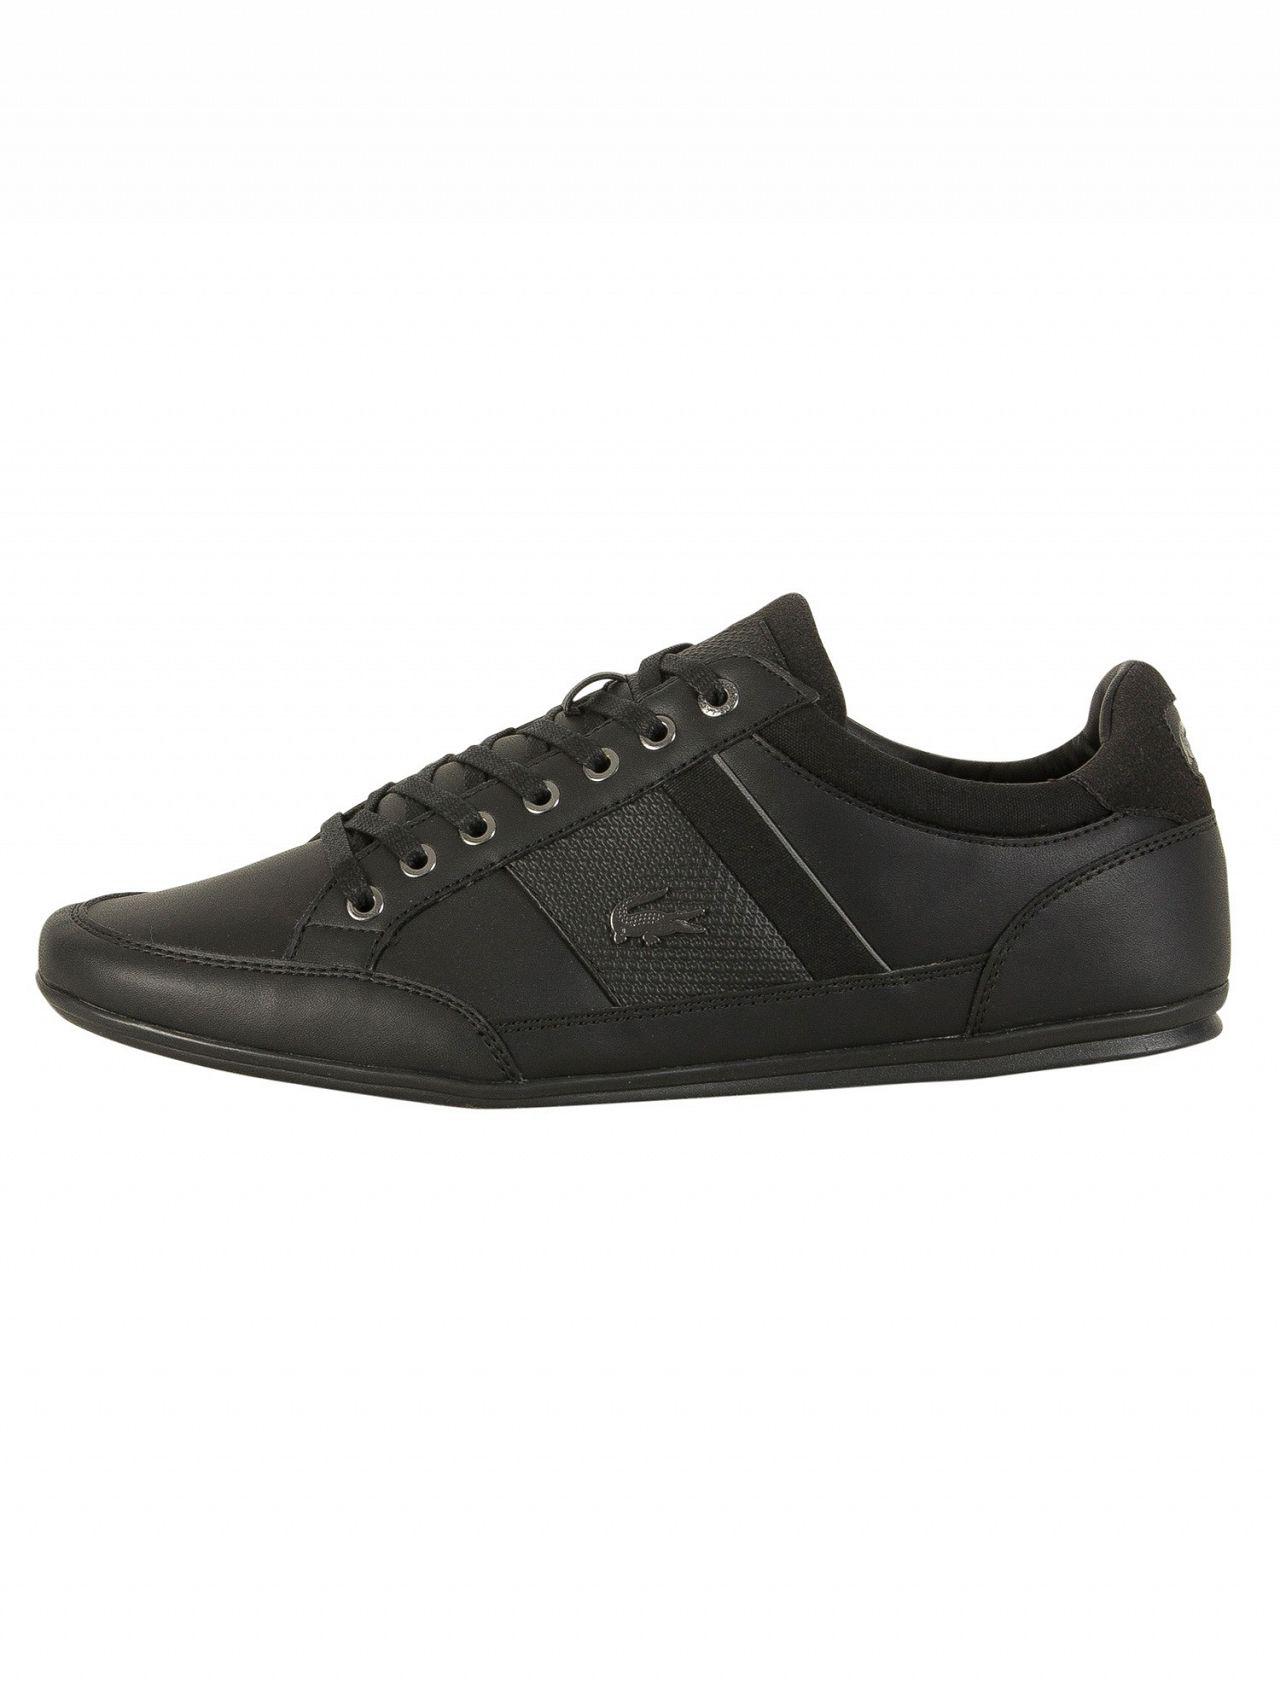 Lacoste Black/dark Grey Chaymon 118 1 Cam Leather Trainers for Men | Lyst